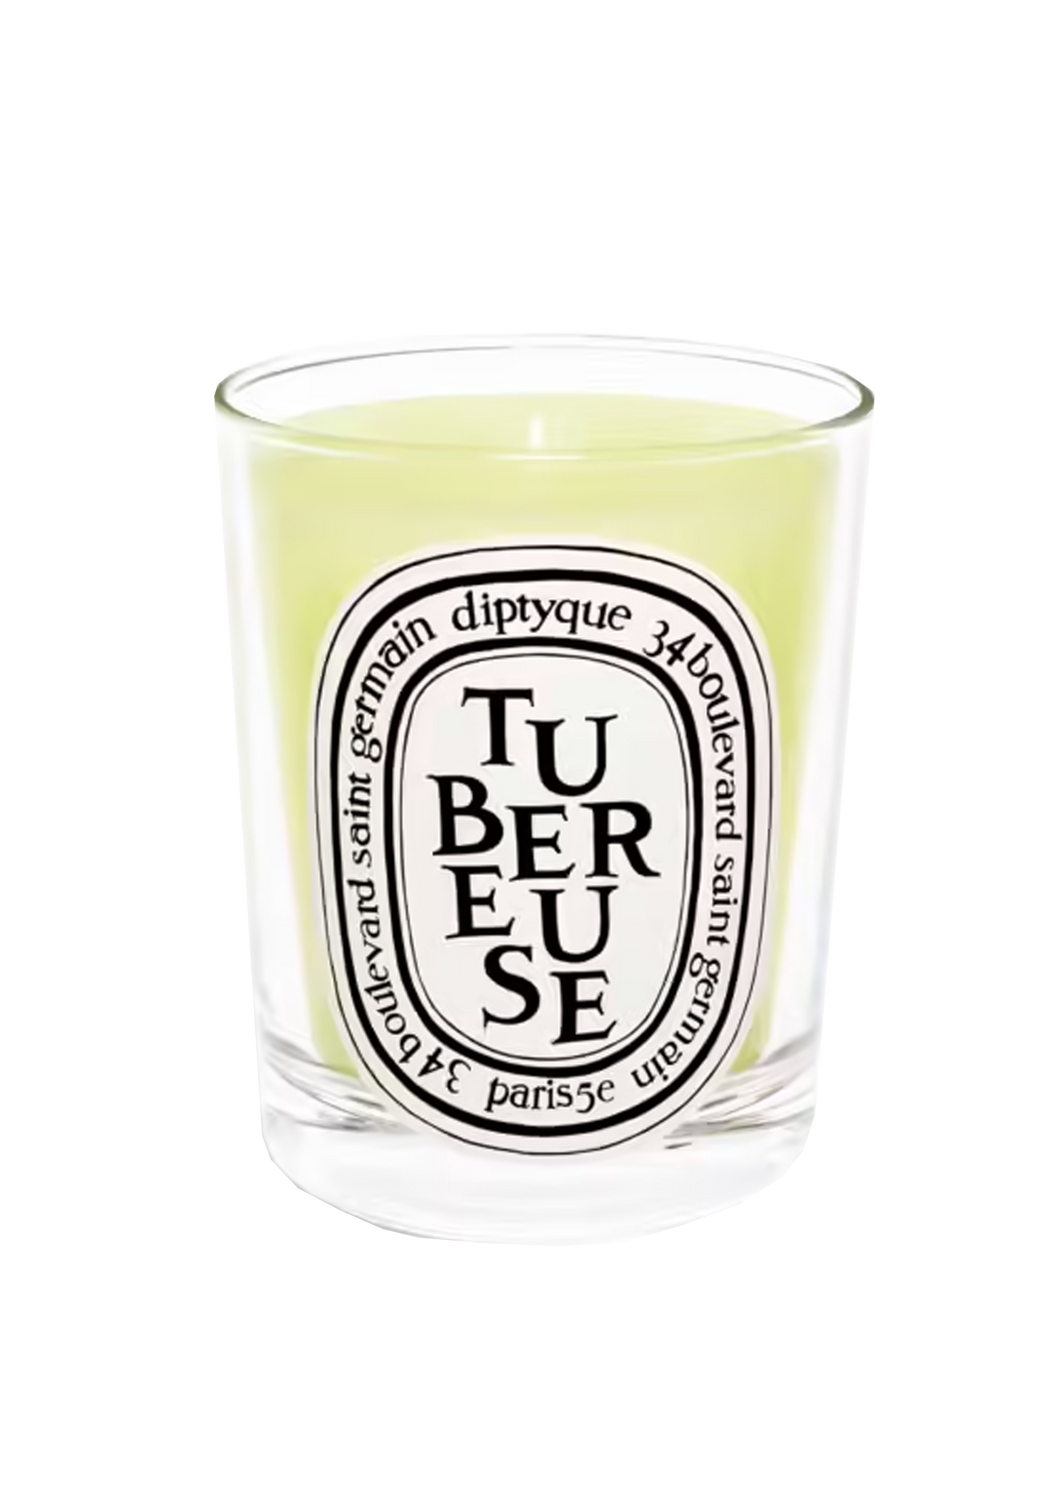 Diptyque Tubereuse Candle, 190g